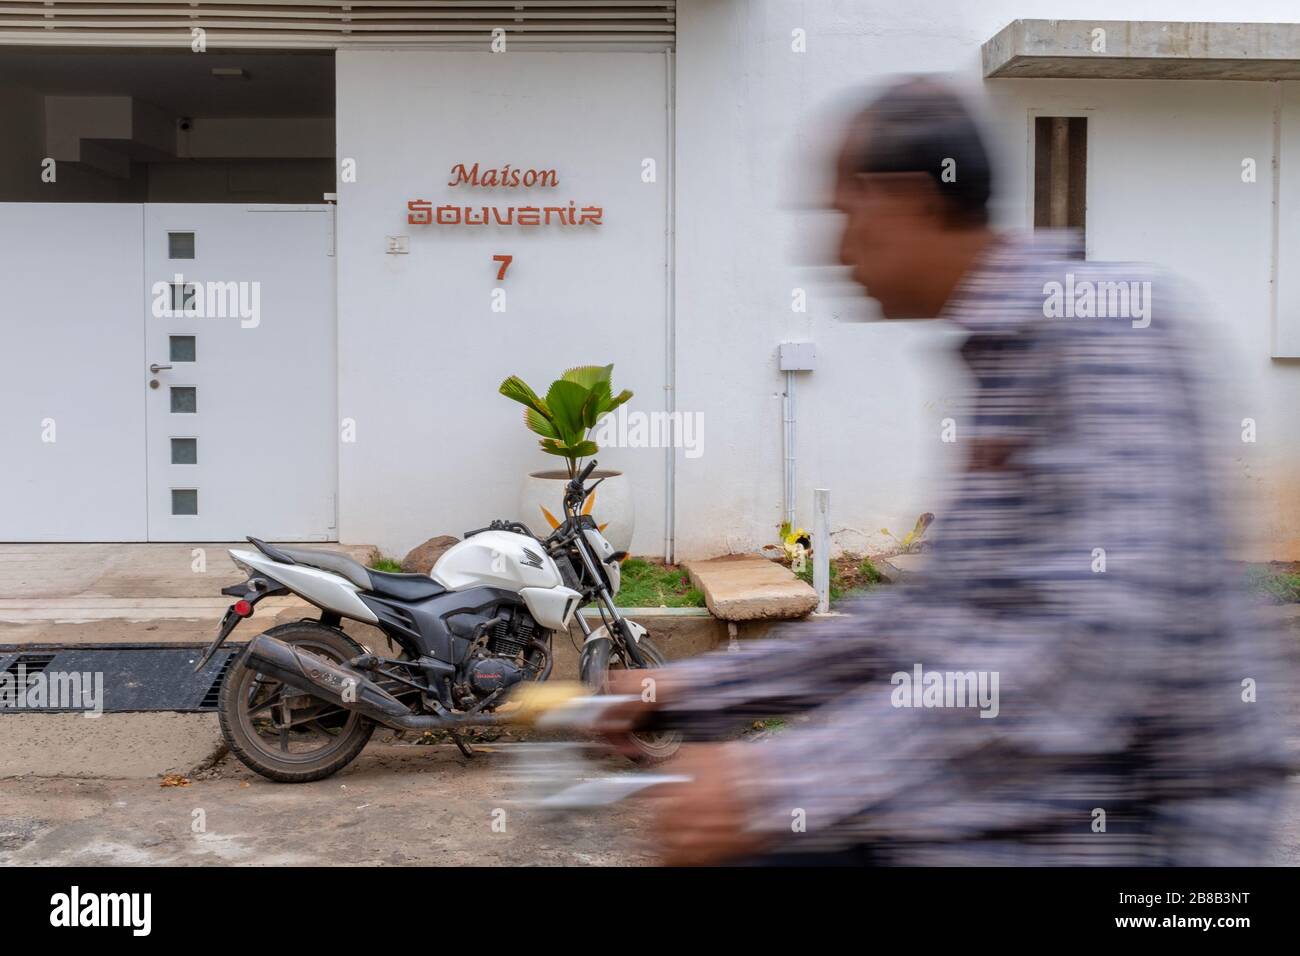 Pondicherry, India - March 17, 2018: An unrecognisable man passing in front of a nice residential building entrance on a bicycle with motion blur Stock Photo